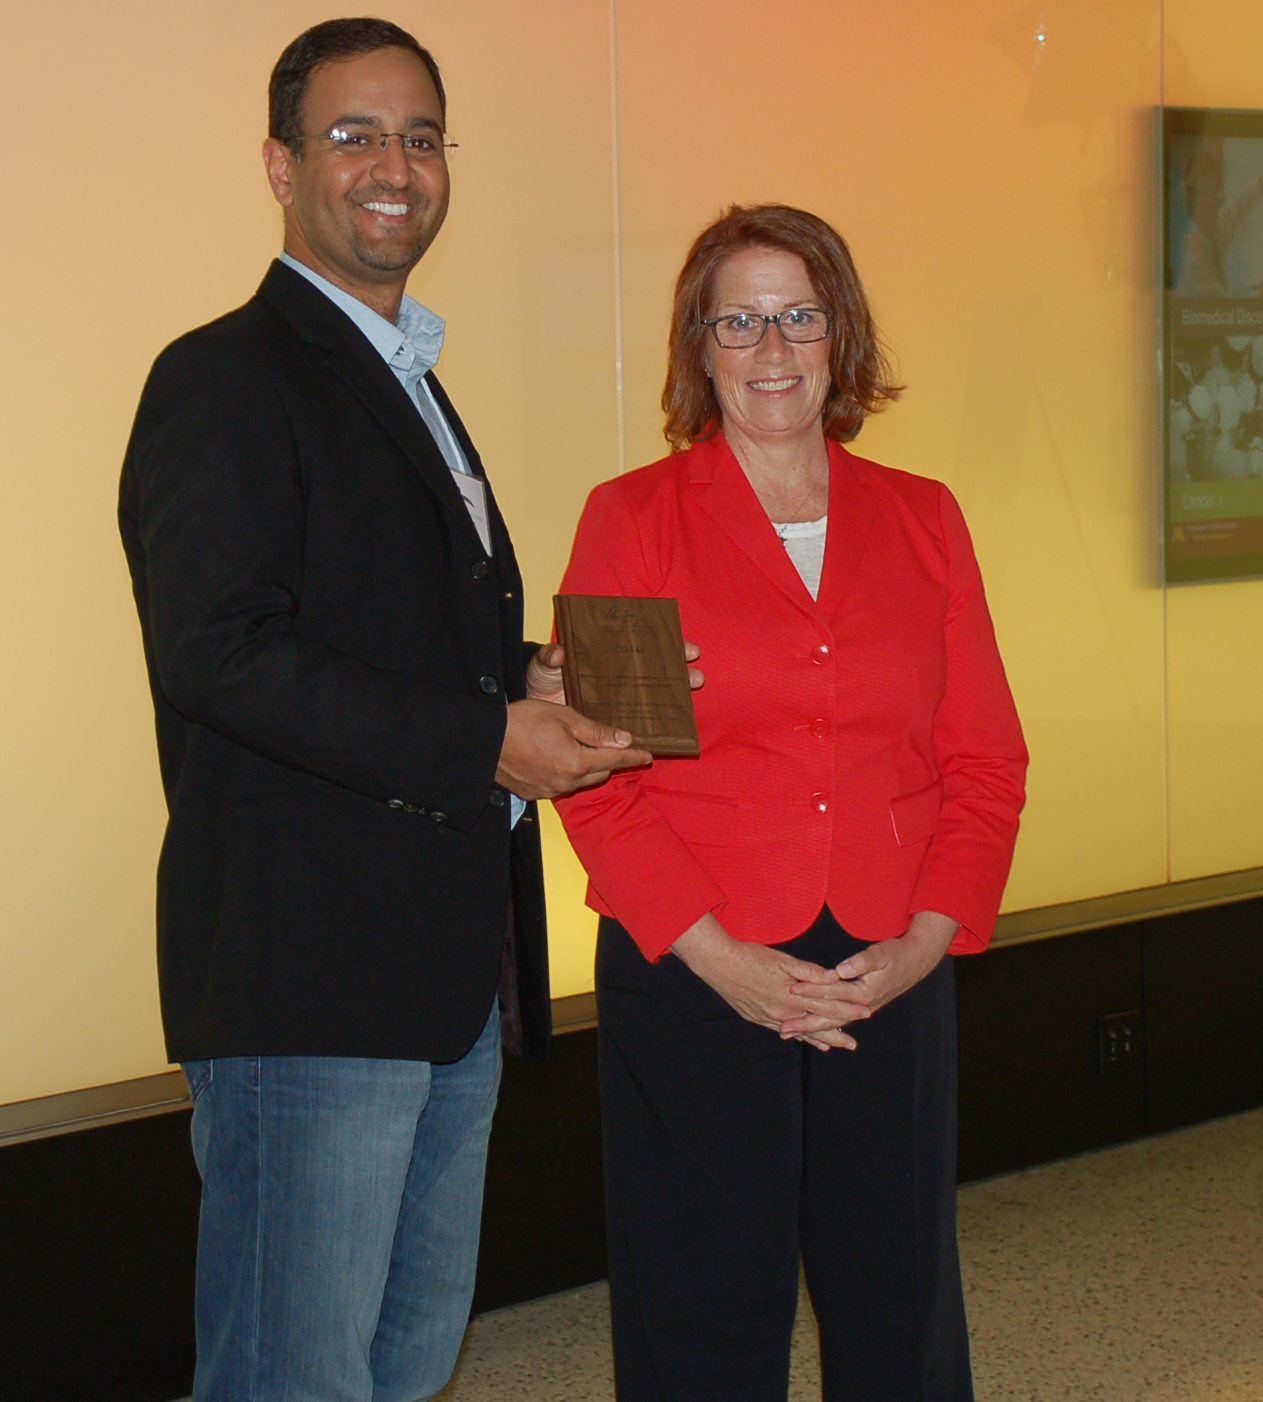 Dr. Zeeshan Syedain, seen here with Rep. Erin Murphy, received a Biobusiness/Biotechnology grant to develop a way to culture living, growing arterial grafts for children who currently require multiple open-heart surgeries when they outgrow their artificial grafts.